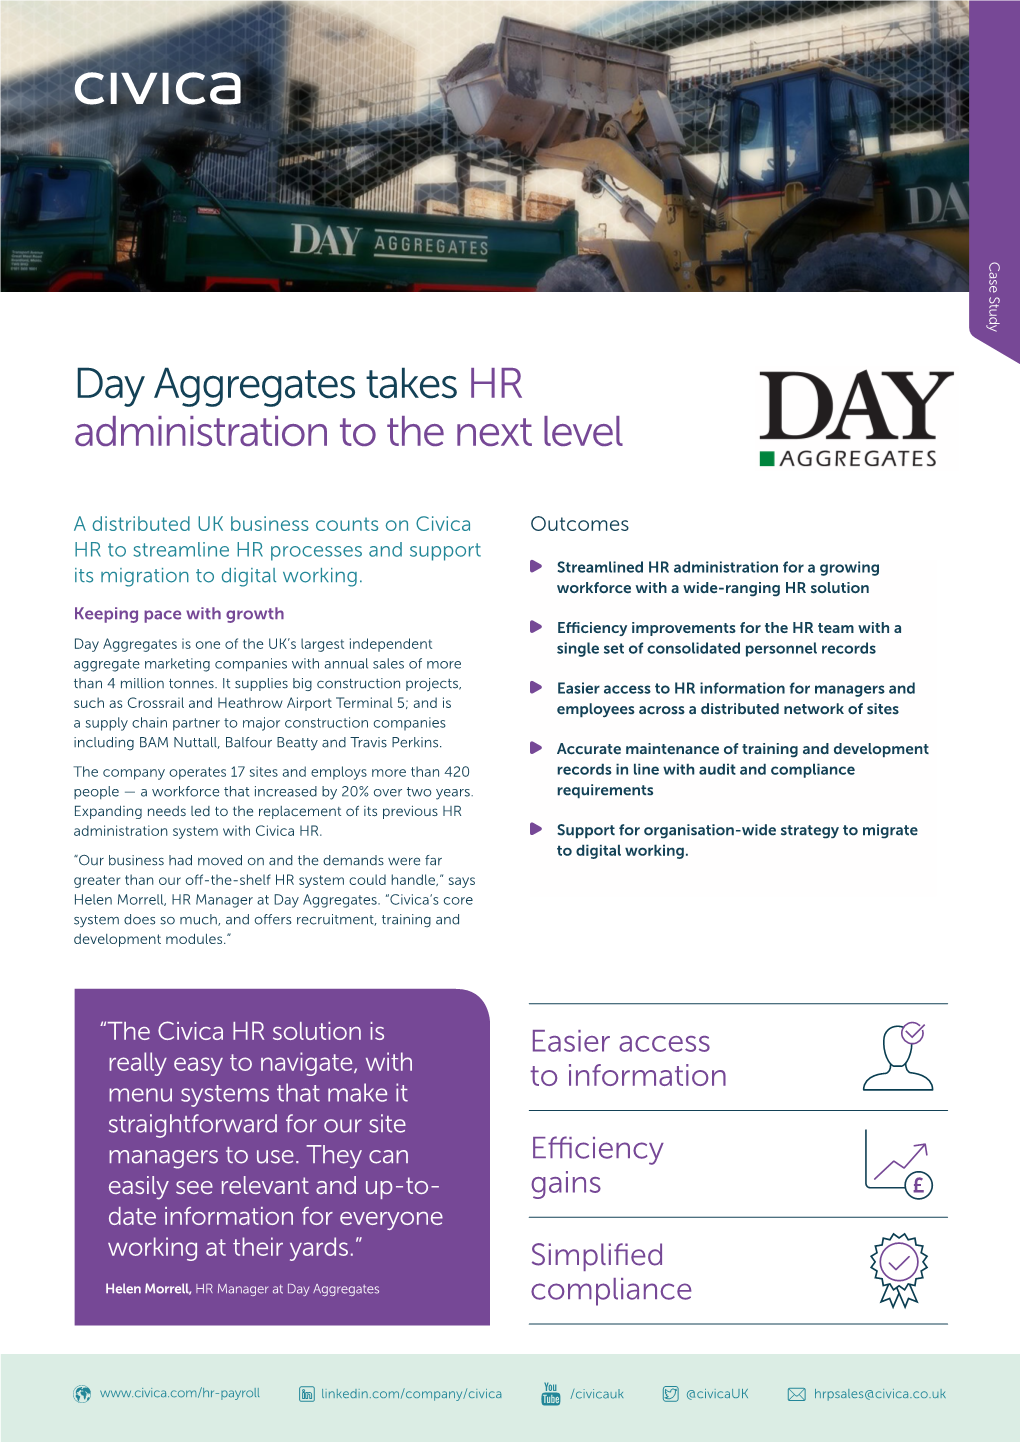 Day Aggregates Takes HR Administration to the Next Level